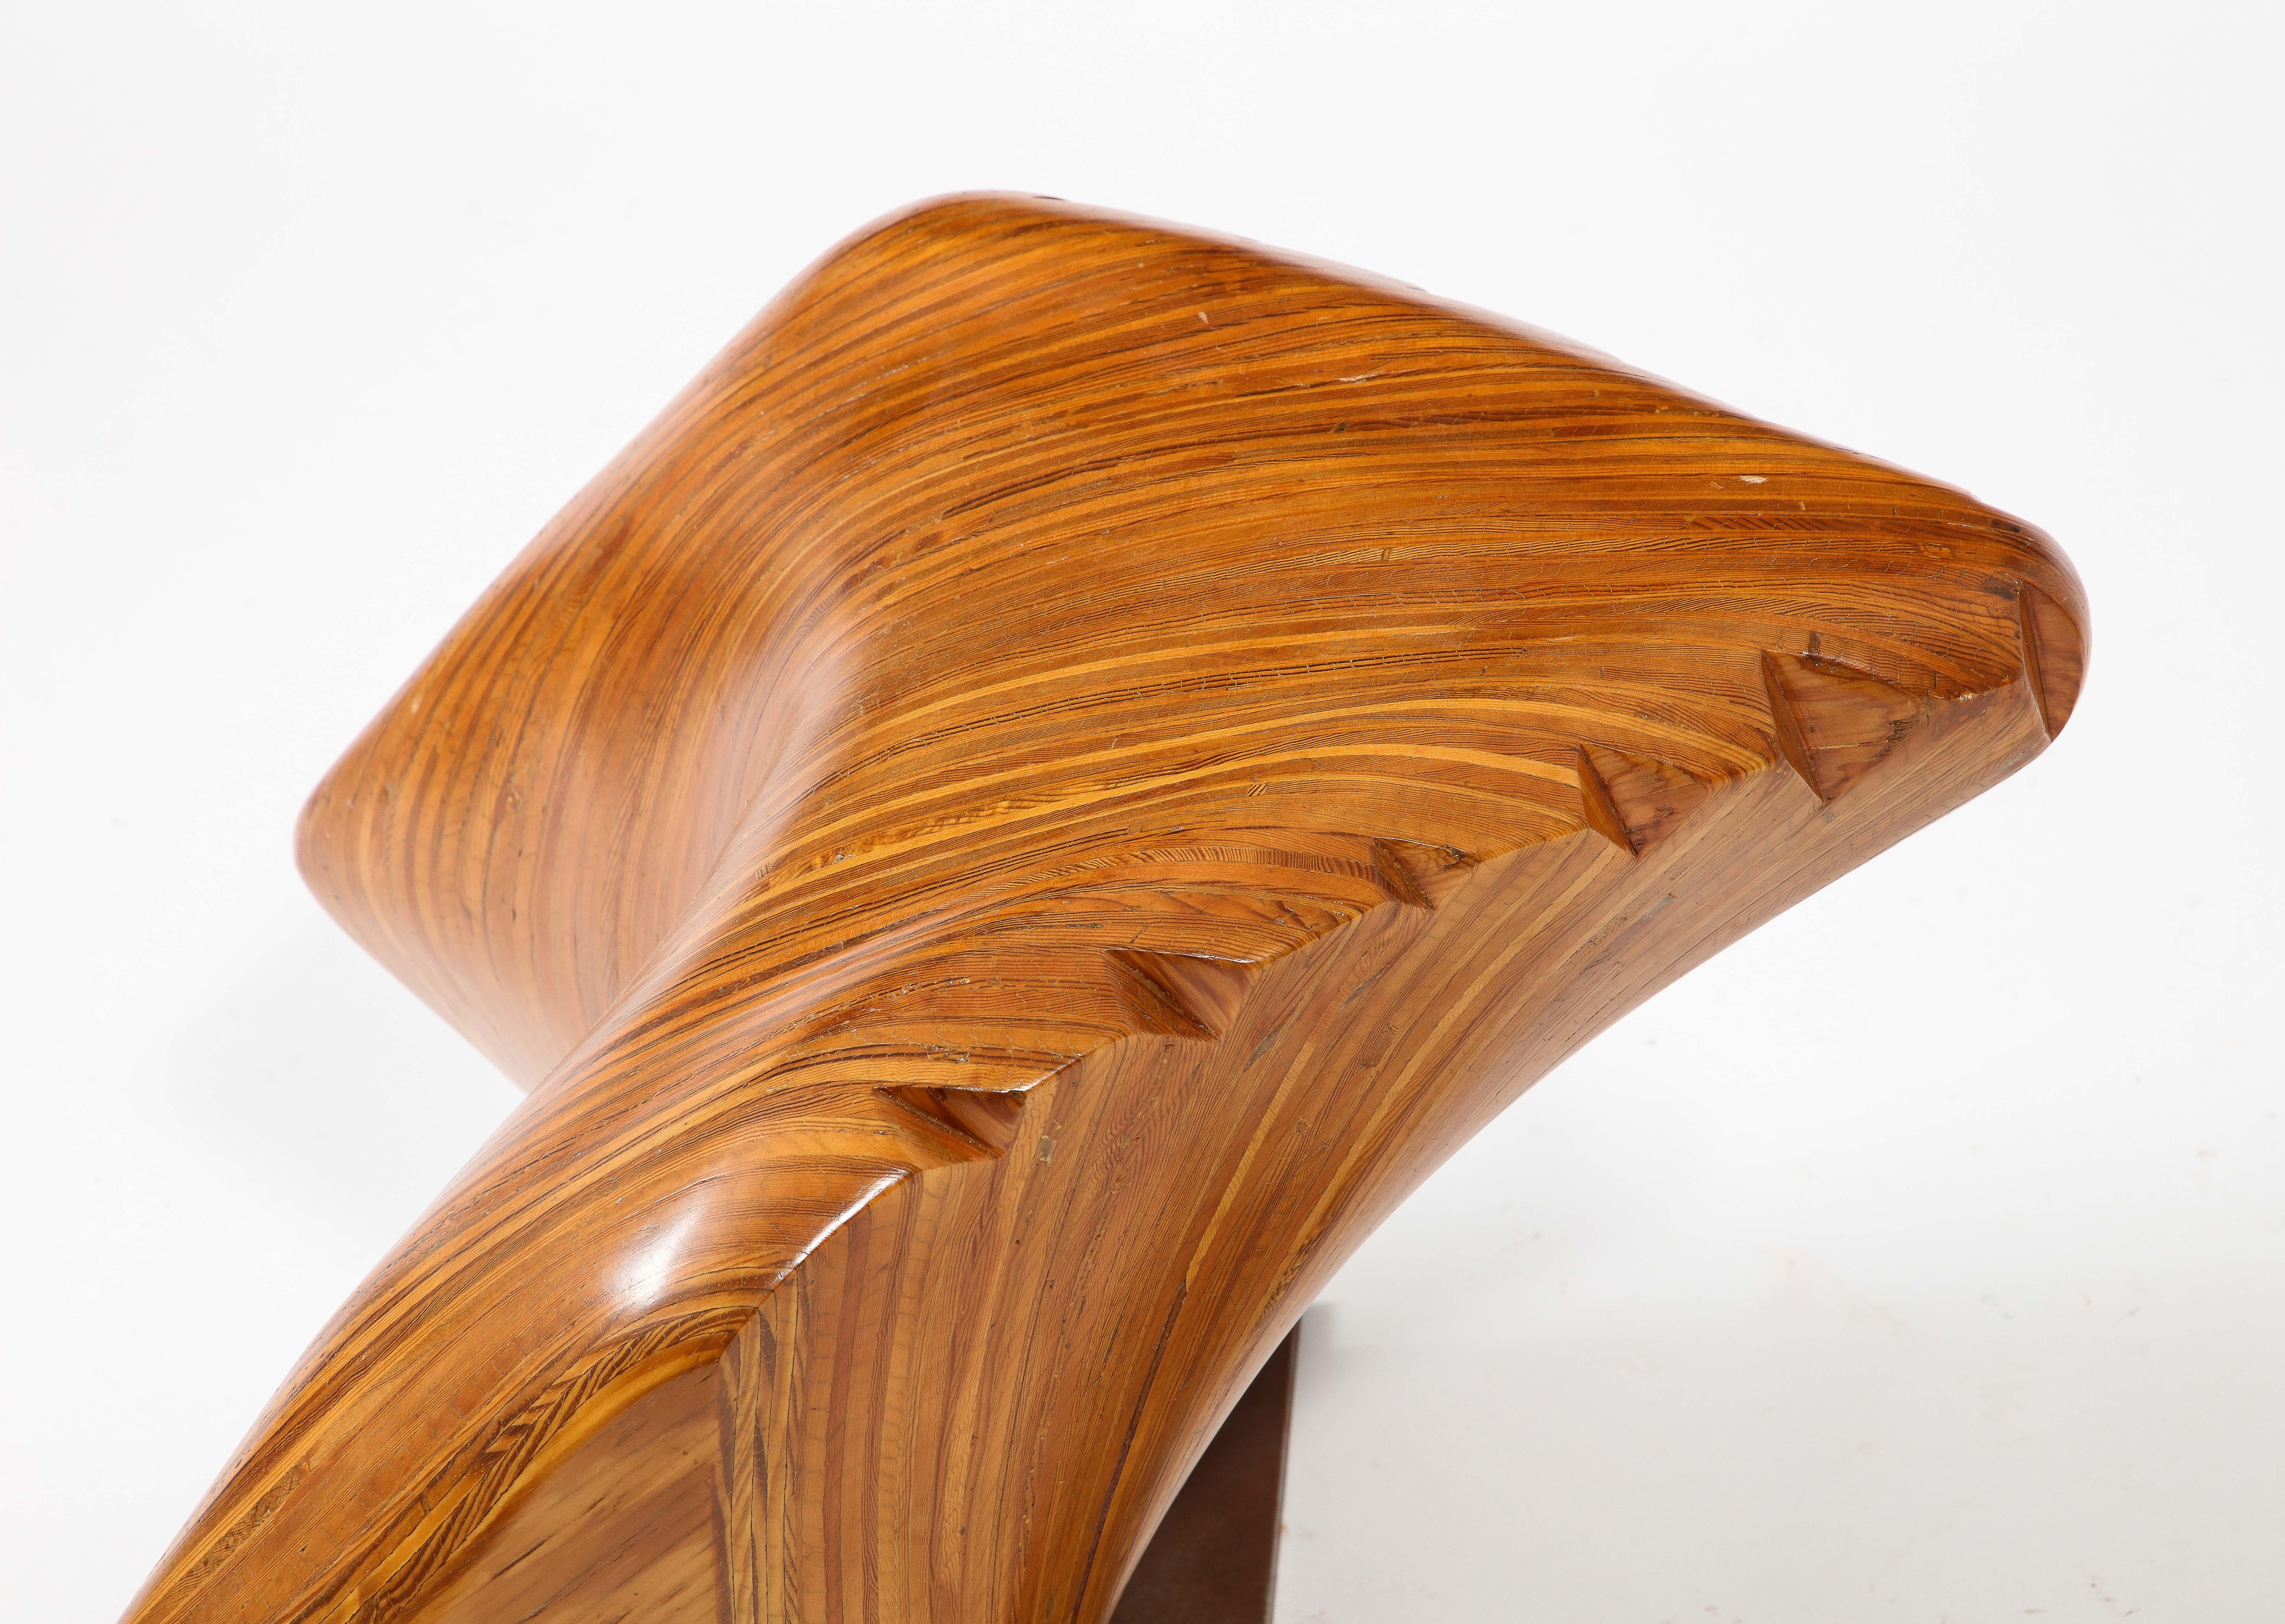 Sculptural Laminated Wood Object or Stool, USA 1960's In Good Condition For Sale In New York, NY